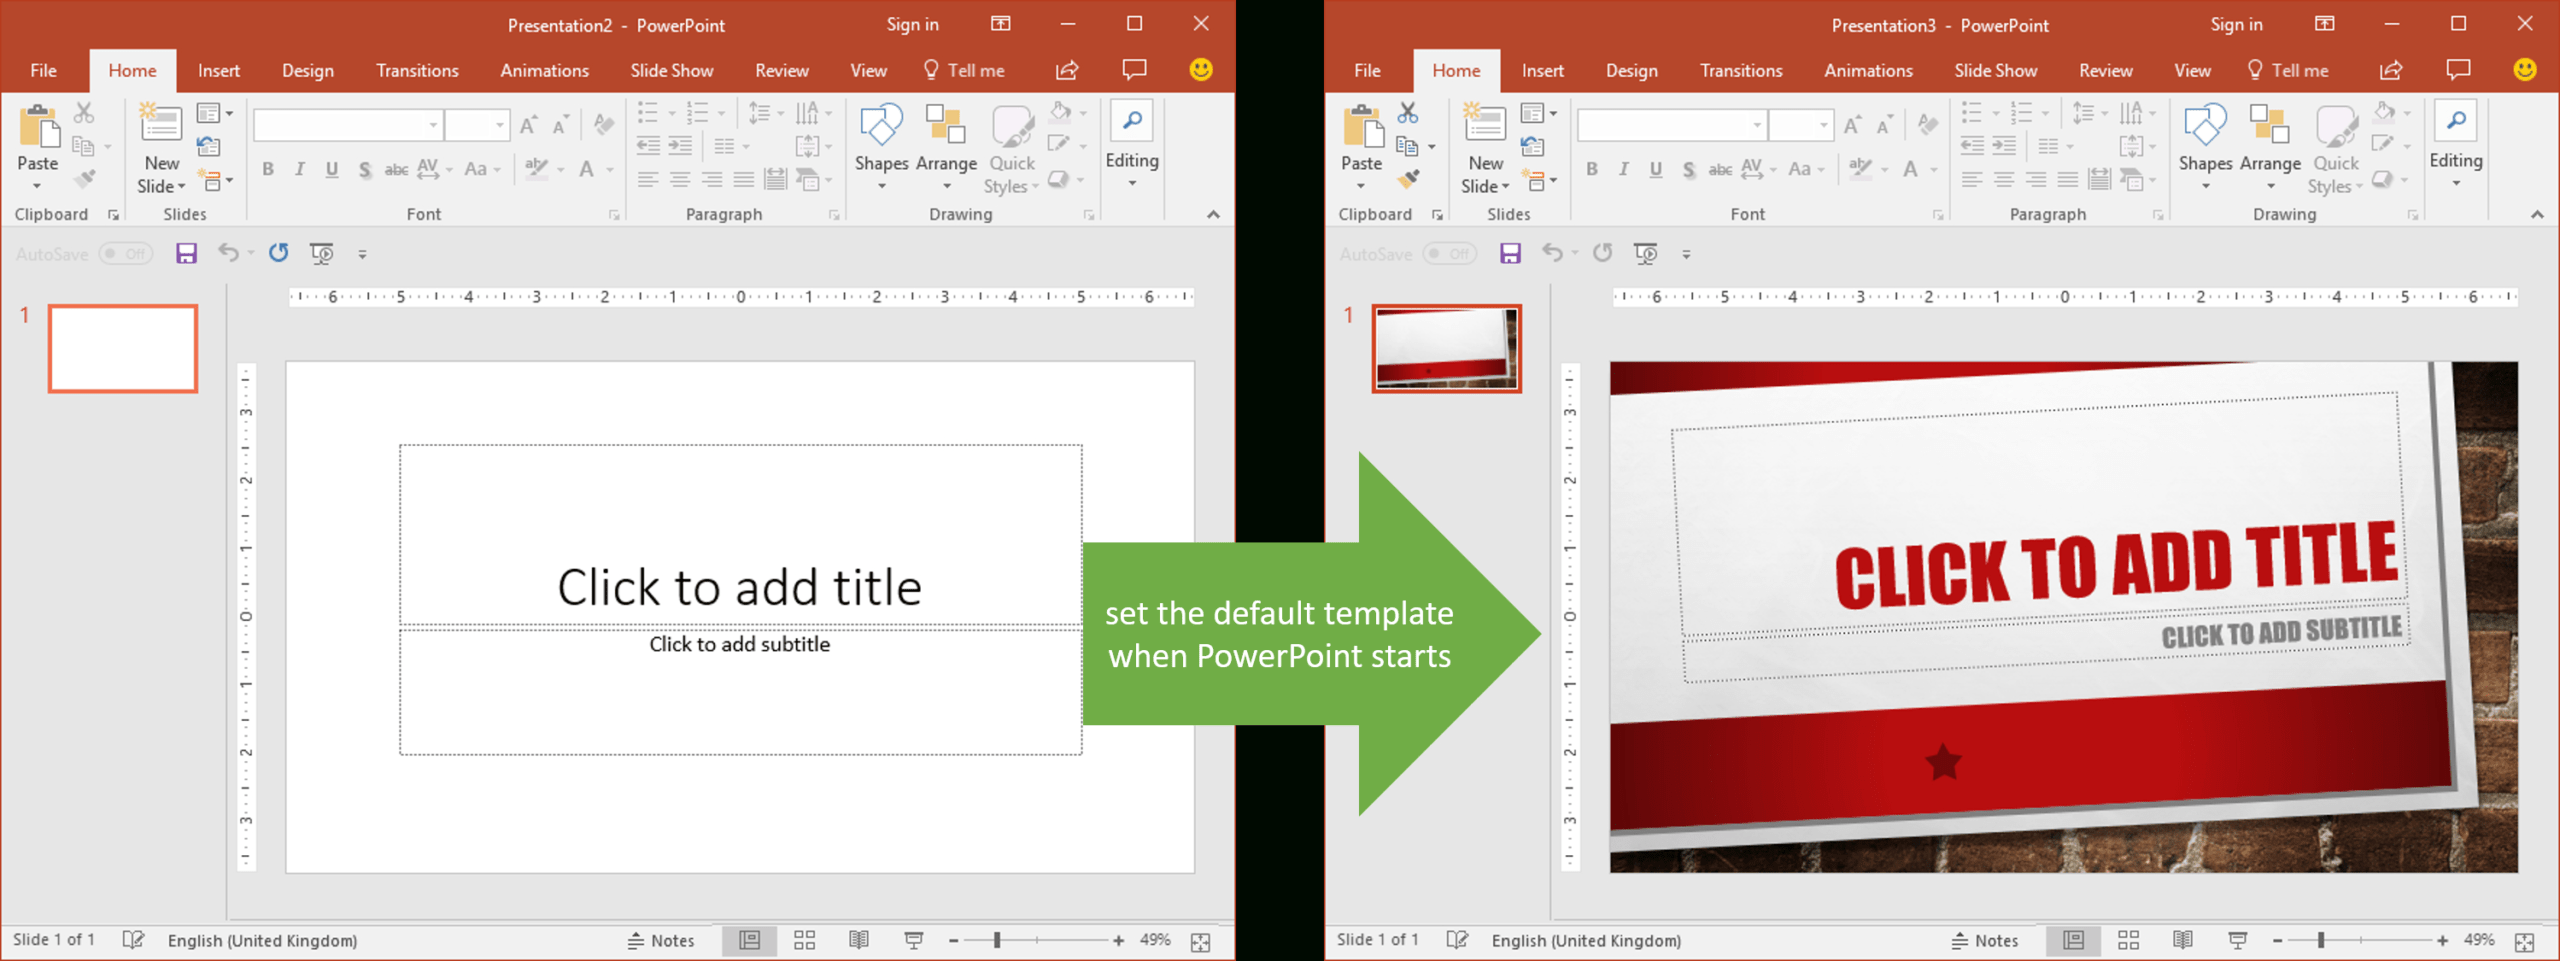 Set The Default Template When Powerpoint Starts | Youpresent With Regard To Powerpoint Default Template